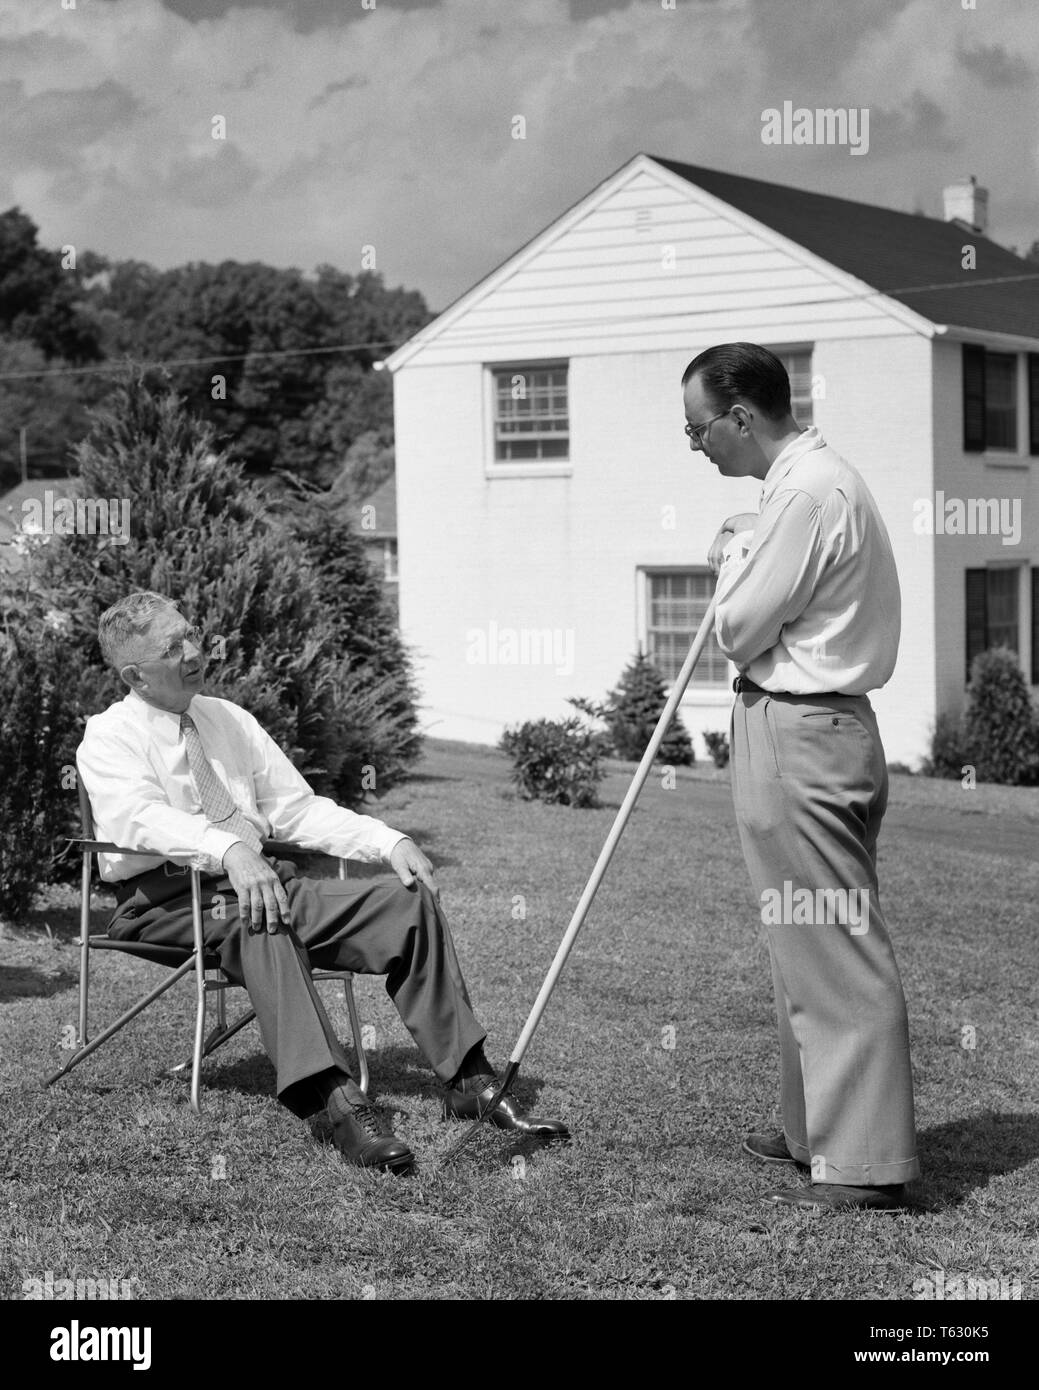 1950s two men in backyard neighbors talking one seated other standing with rake - s5808 HAR001 HARS JUVENILE COMMUNICATION SONS LIFESTYLE ELDER HOUSES RAKE HOME LIFE SEATED COPY SPACE FRIENDSHIP FULL-LENGTH PERSONS RESIDENTIAL MALES BUILDINGS SENIOR MAN SENIOR ADULT FATHERS B&W NEIGHBORS OLDSTERS OLDSTER DADS EXTERIOR FATHER AND SON IN HOMES ELDERS CONNECTION OLD AND YOUNG RESIDENCE STYLISH COOPERATION JUVENILES LAWN CHAIR MID-ADULT MID-ADULT MAN TOGETHERNESS BLACK AND WHITE CAUCASIAN ETHNICITY HAR001 OLD FASHIONED Stock Photo